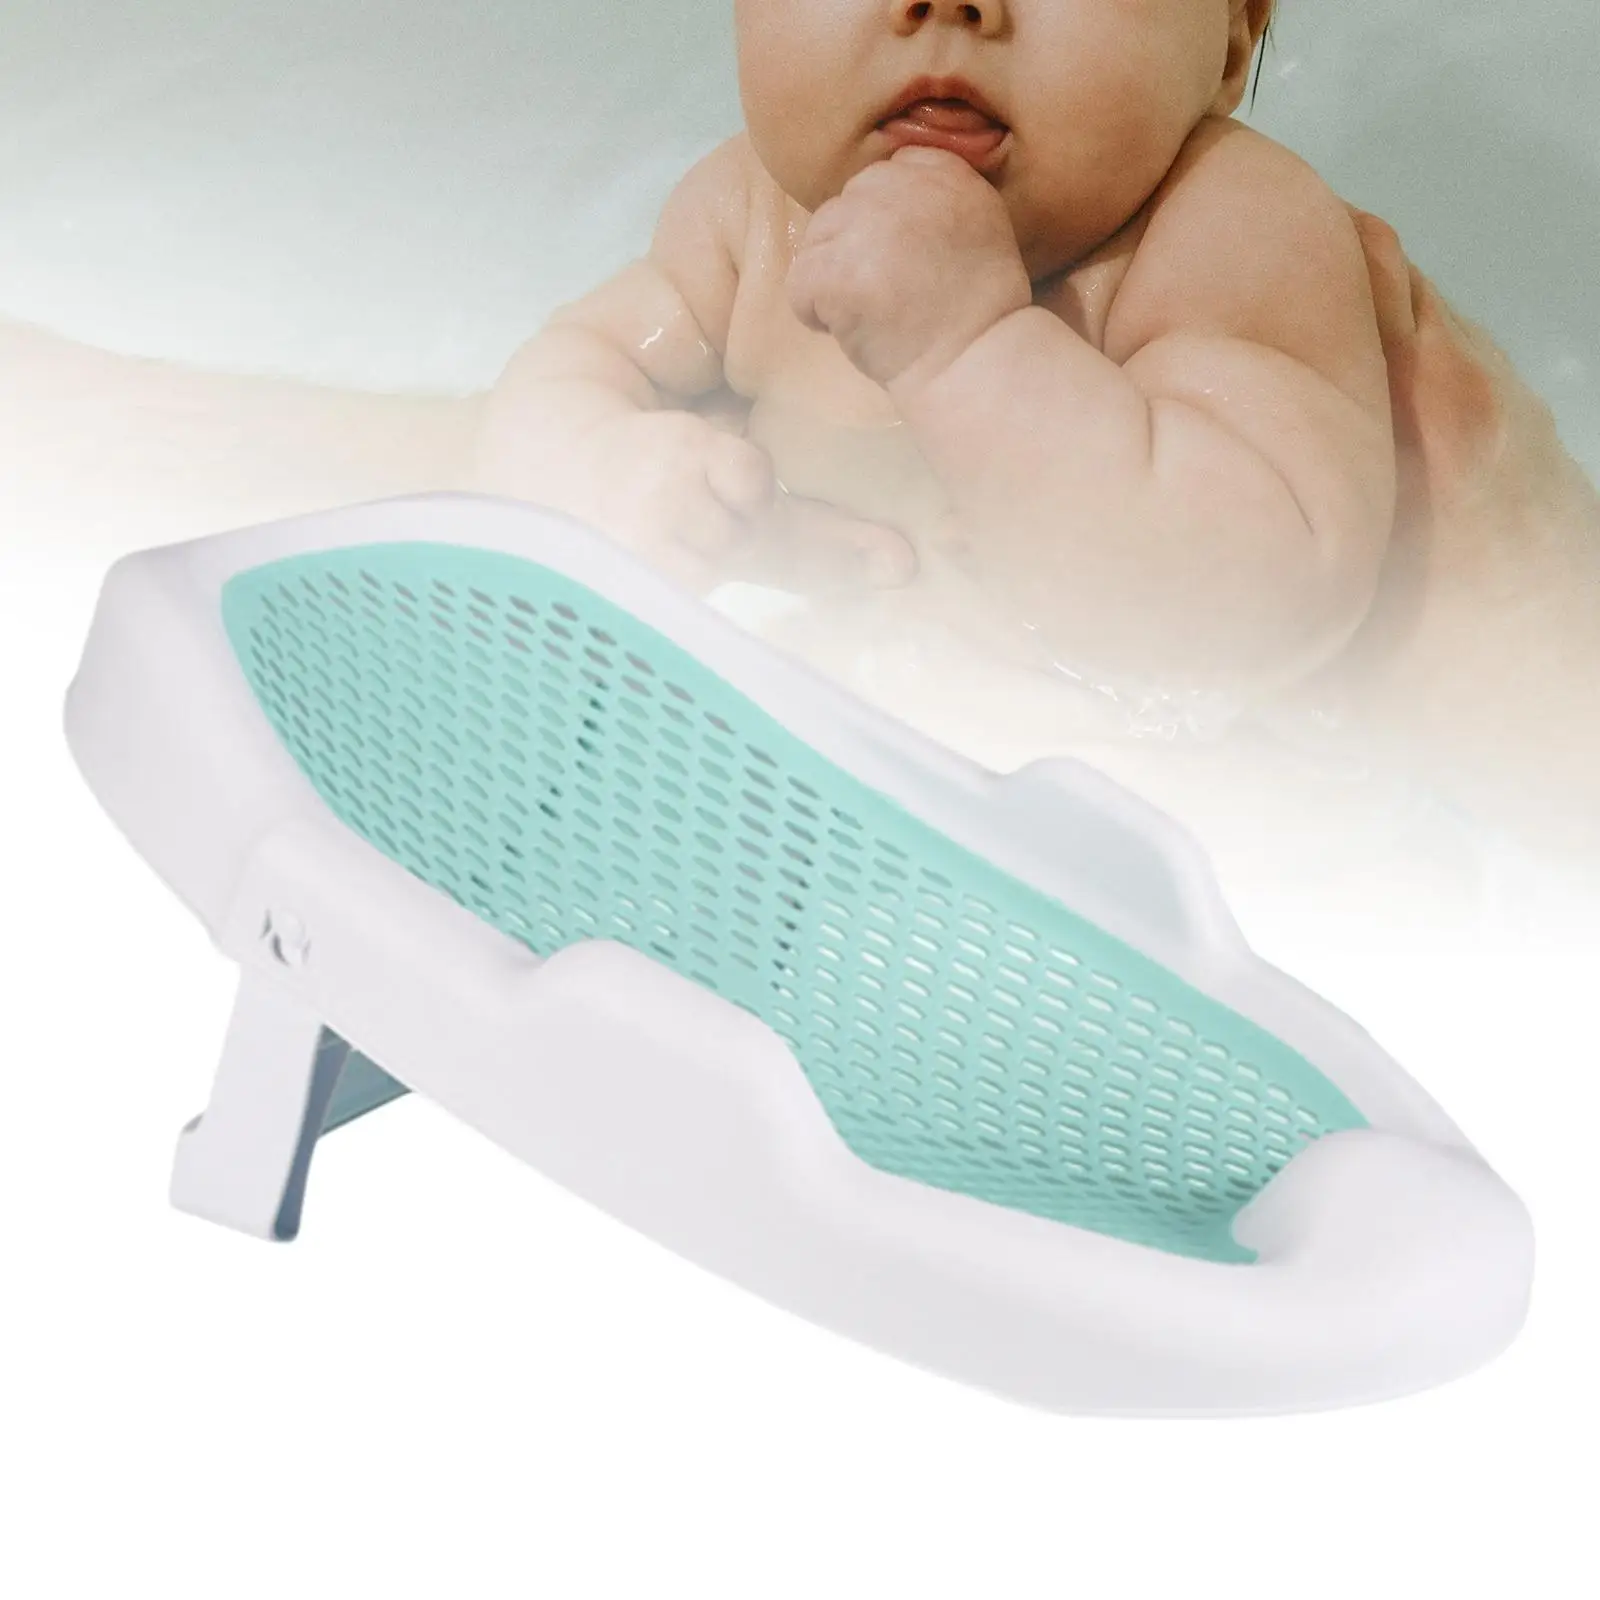 Baby Bath Seat Support Rack Soft TPE Use from Birth until Sitting up Anti Slip Bathtub Shower Rack for Toddler 0-2 Years Baby